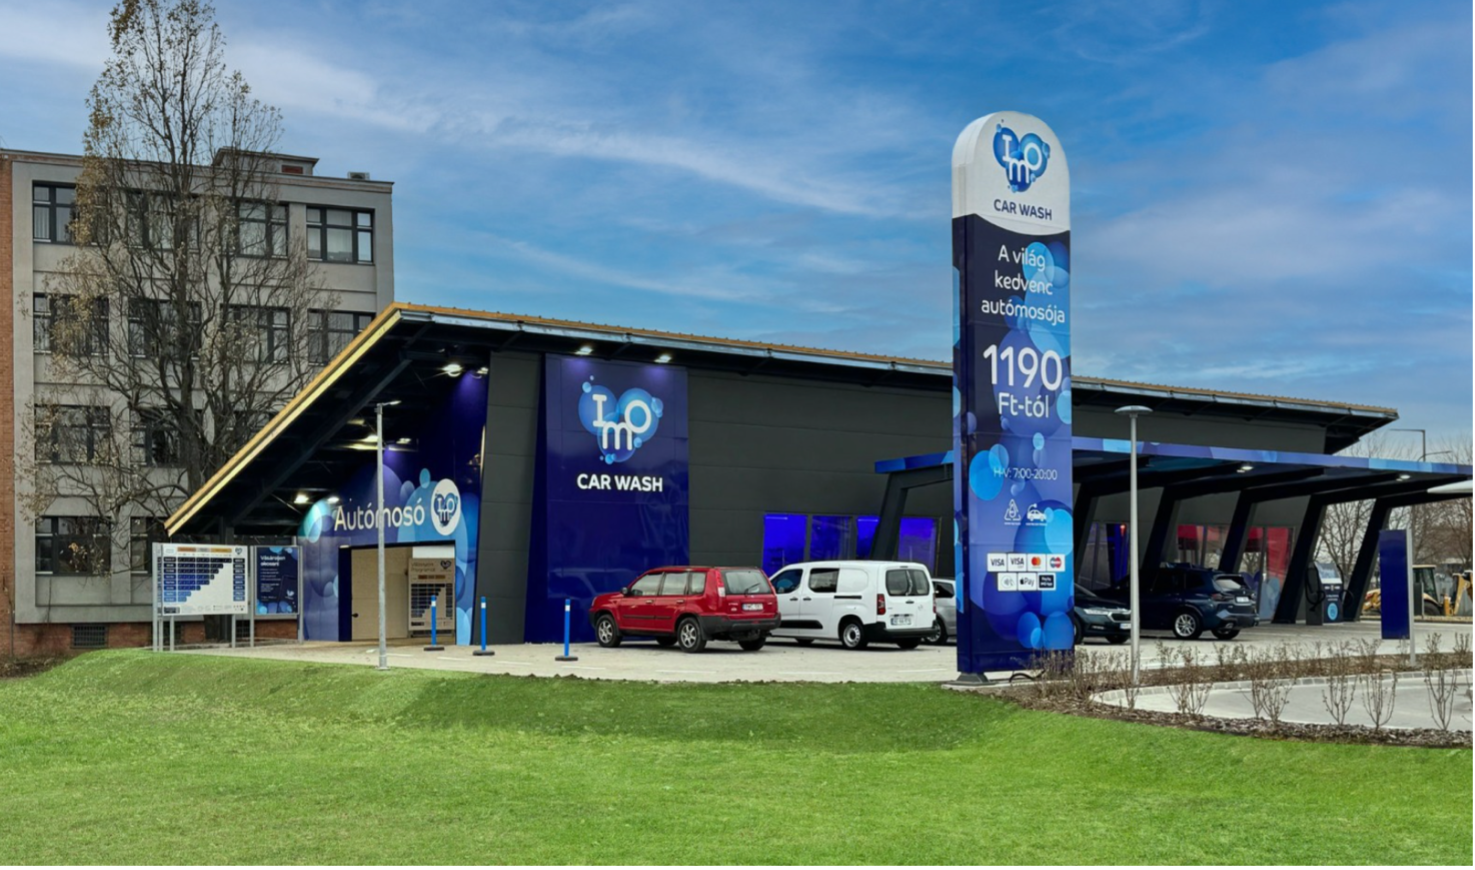 IMO Car Wash announces the opening of 6 locations across Australia, Hungary, Czech Republic and Belgium